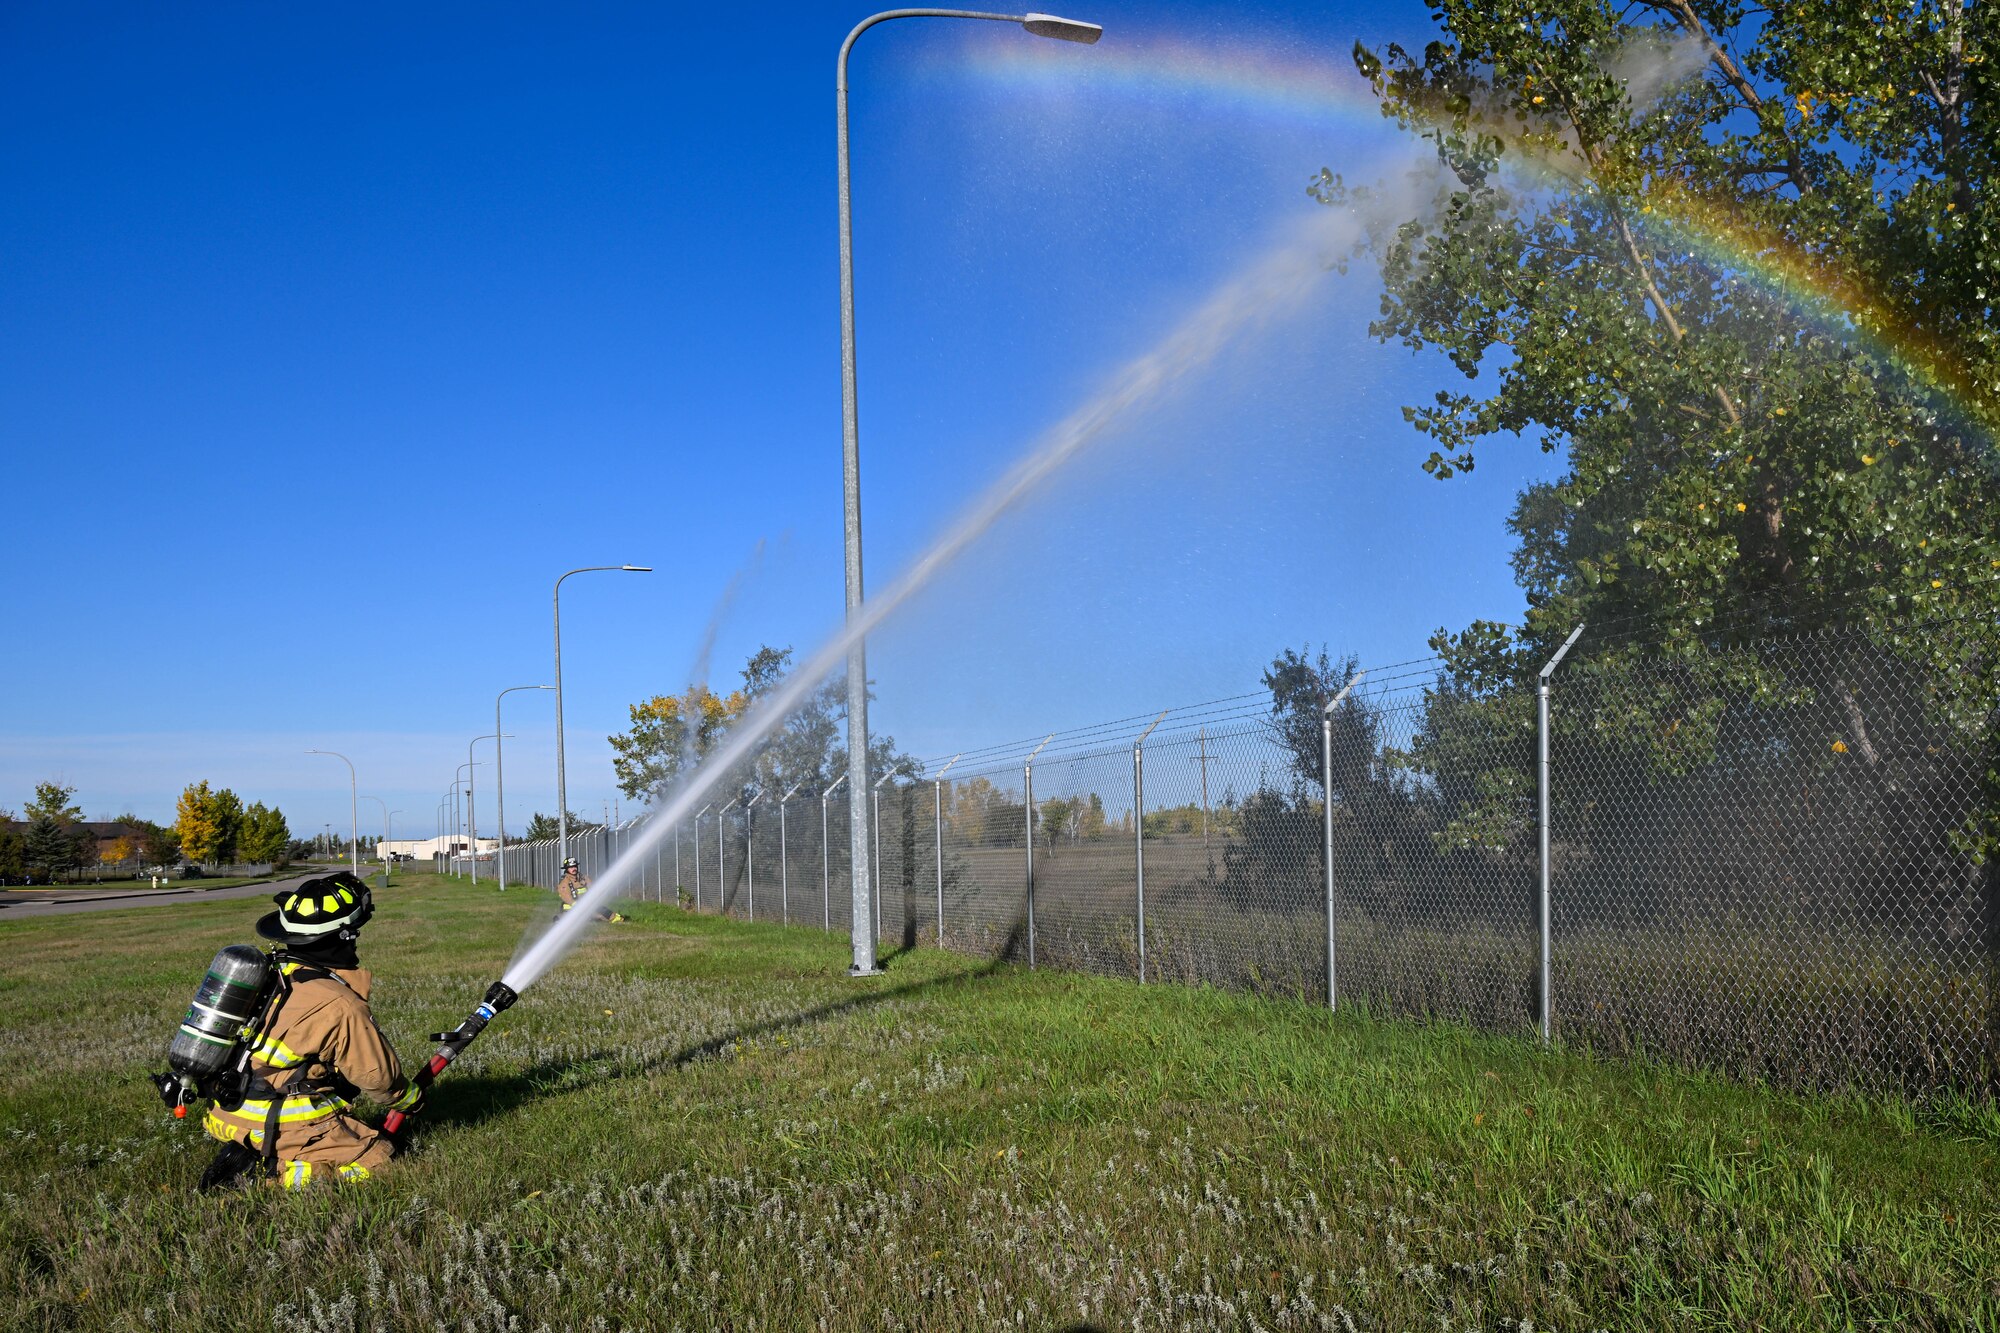 Airman 1st Class Cole Burchfield, 5th Civil Engineer Squadron firefighter, discharges a fire hose during a National Fire Protection Association (NFPA) 1410 drill at Minot Air Force Base, North Dakota, Oct. 4, 2023. Burchfield and other Team Minot firefighters conducted readiness exercises as part of National Fire Prevention Week. (U.S. Air Force photo by Airman 1st Class Kyle Wilson)